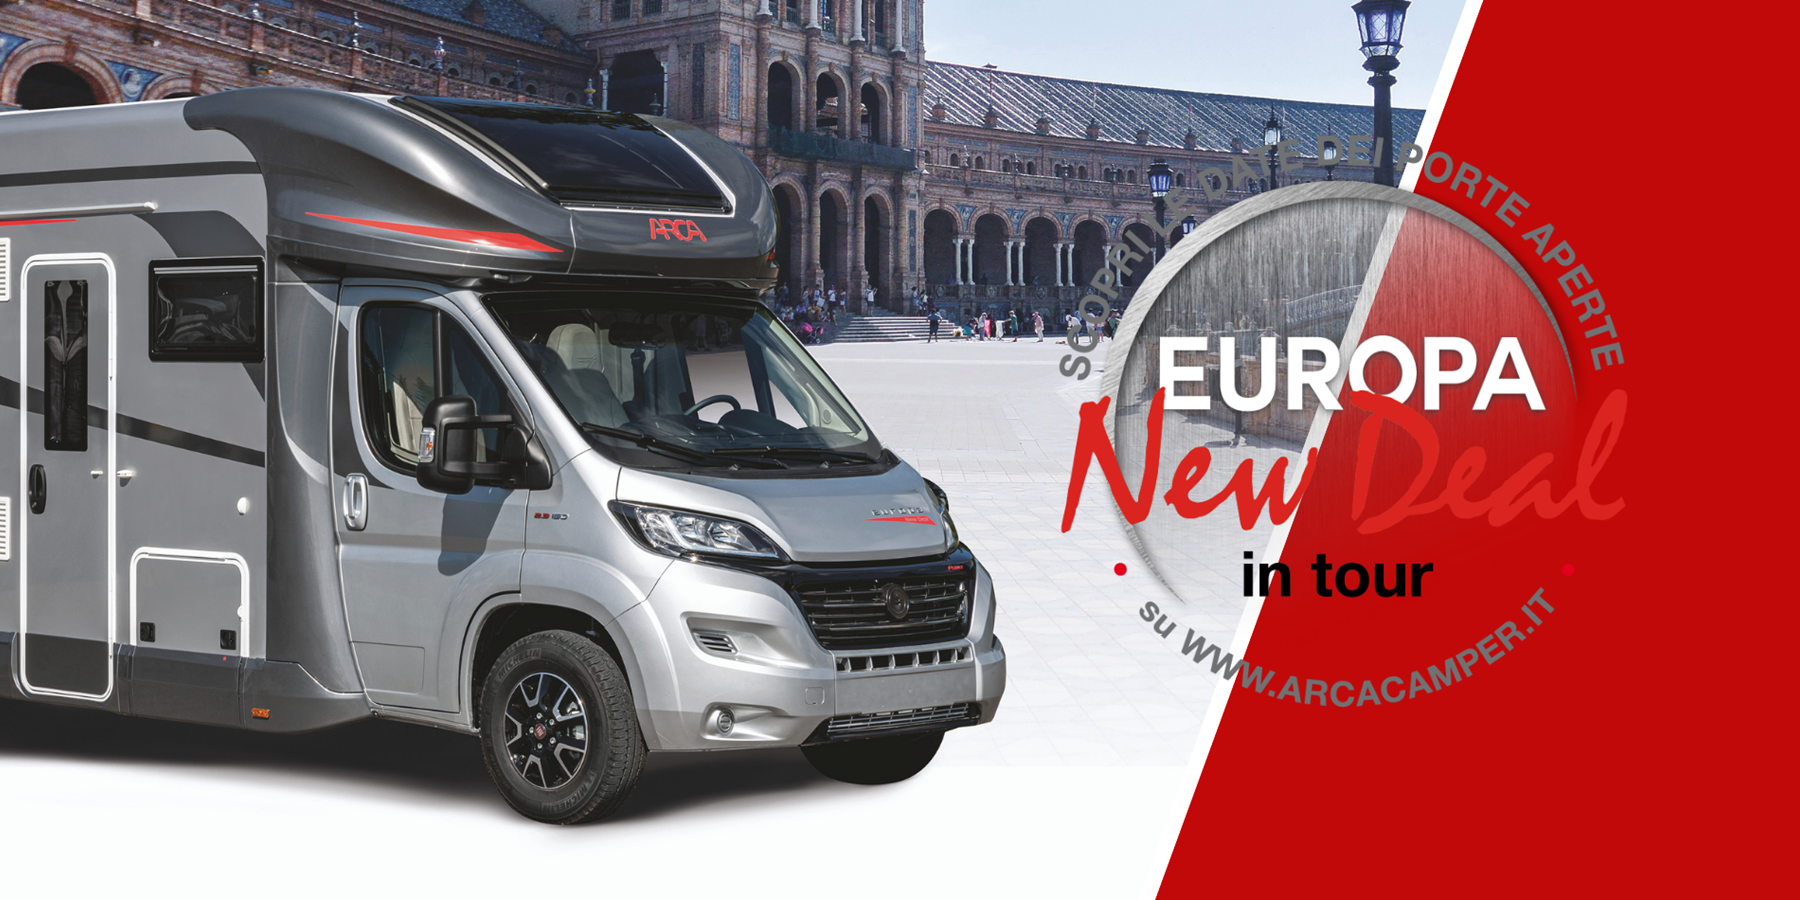 Europa New Deal in Tour!